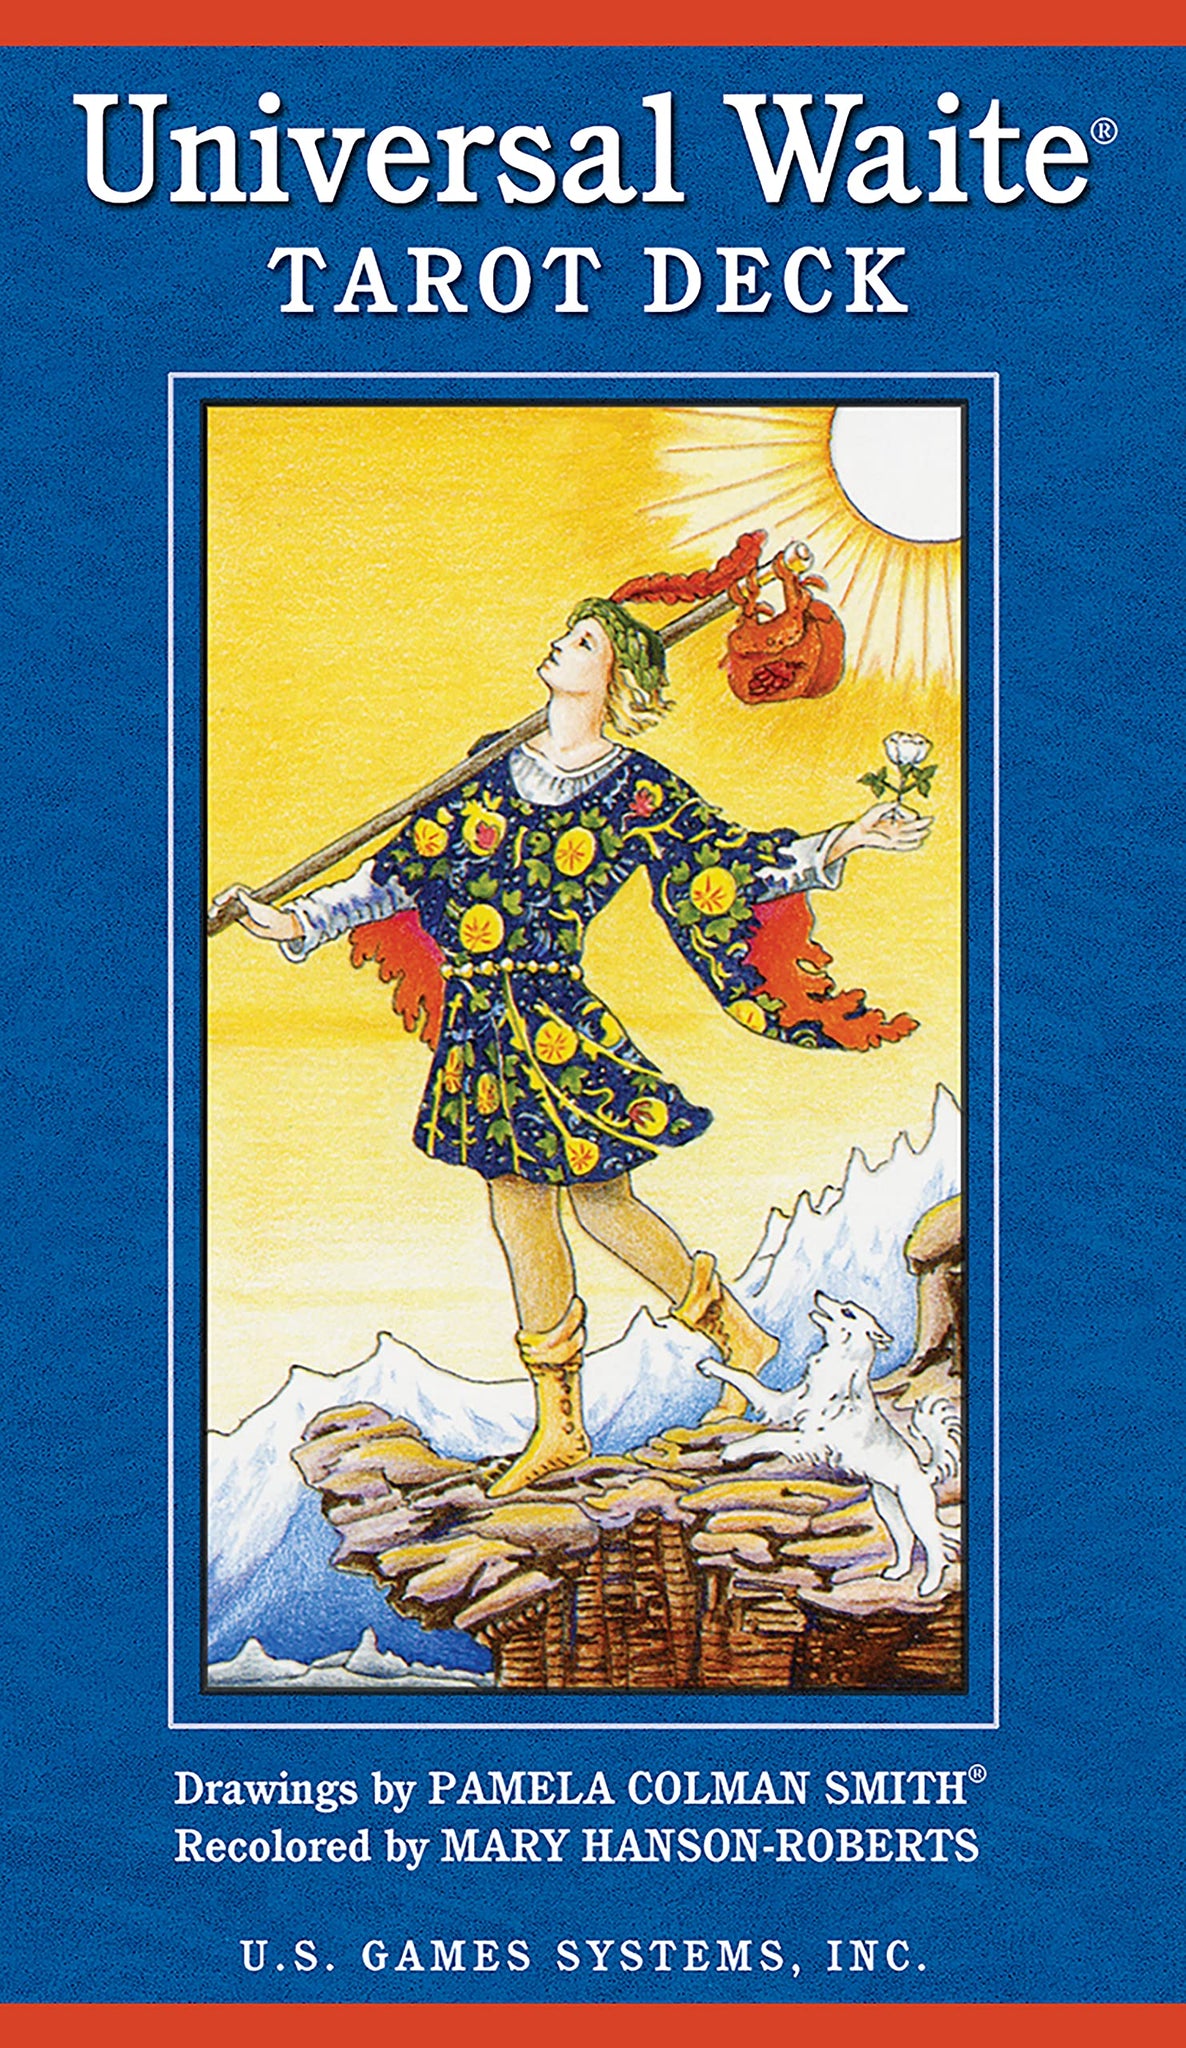 Universal Waite Tarot Deck recolored by Mary Hanson-Roberts